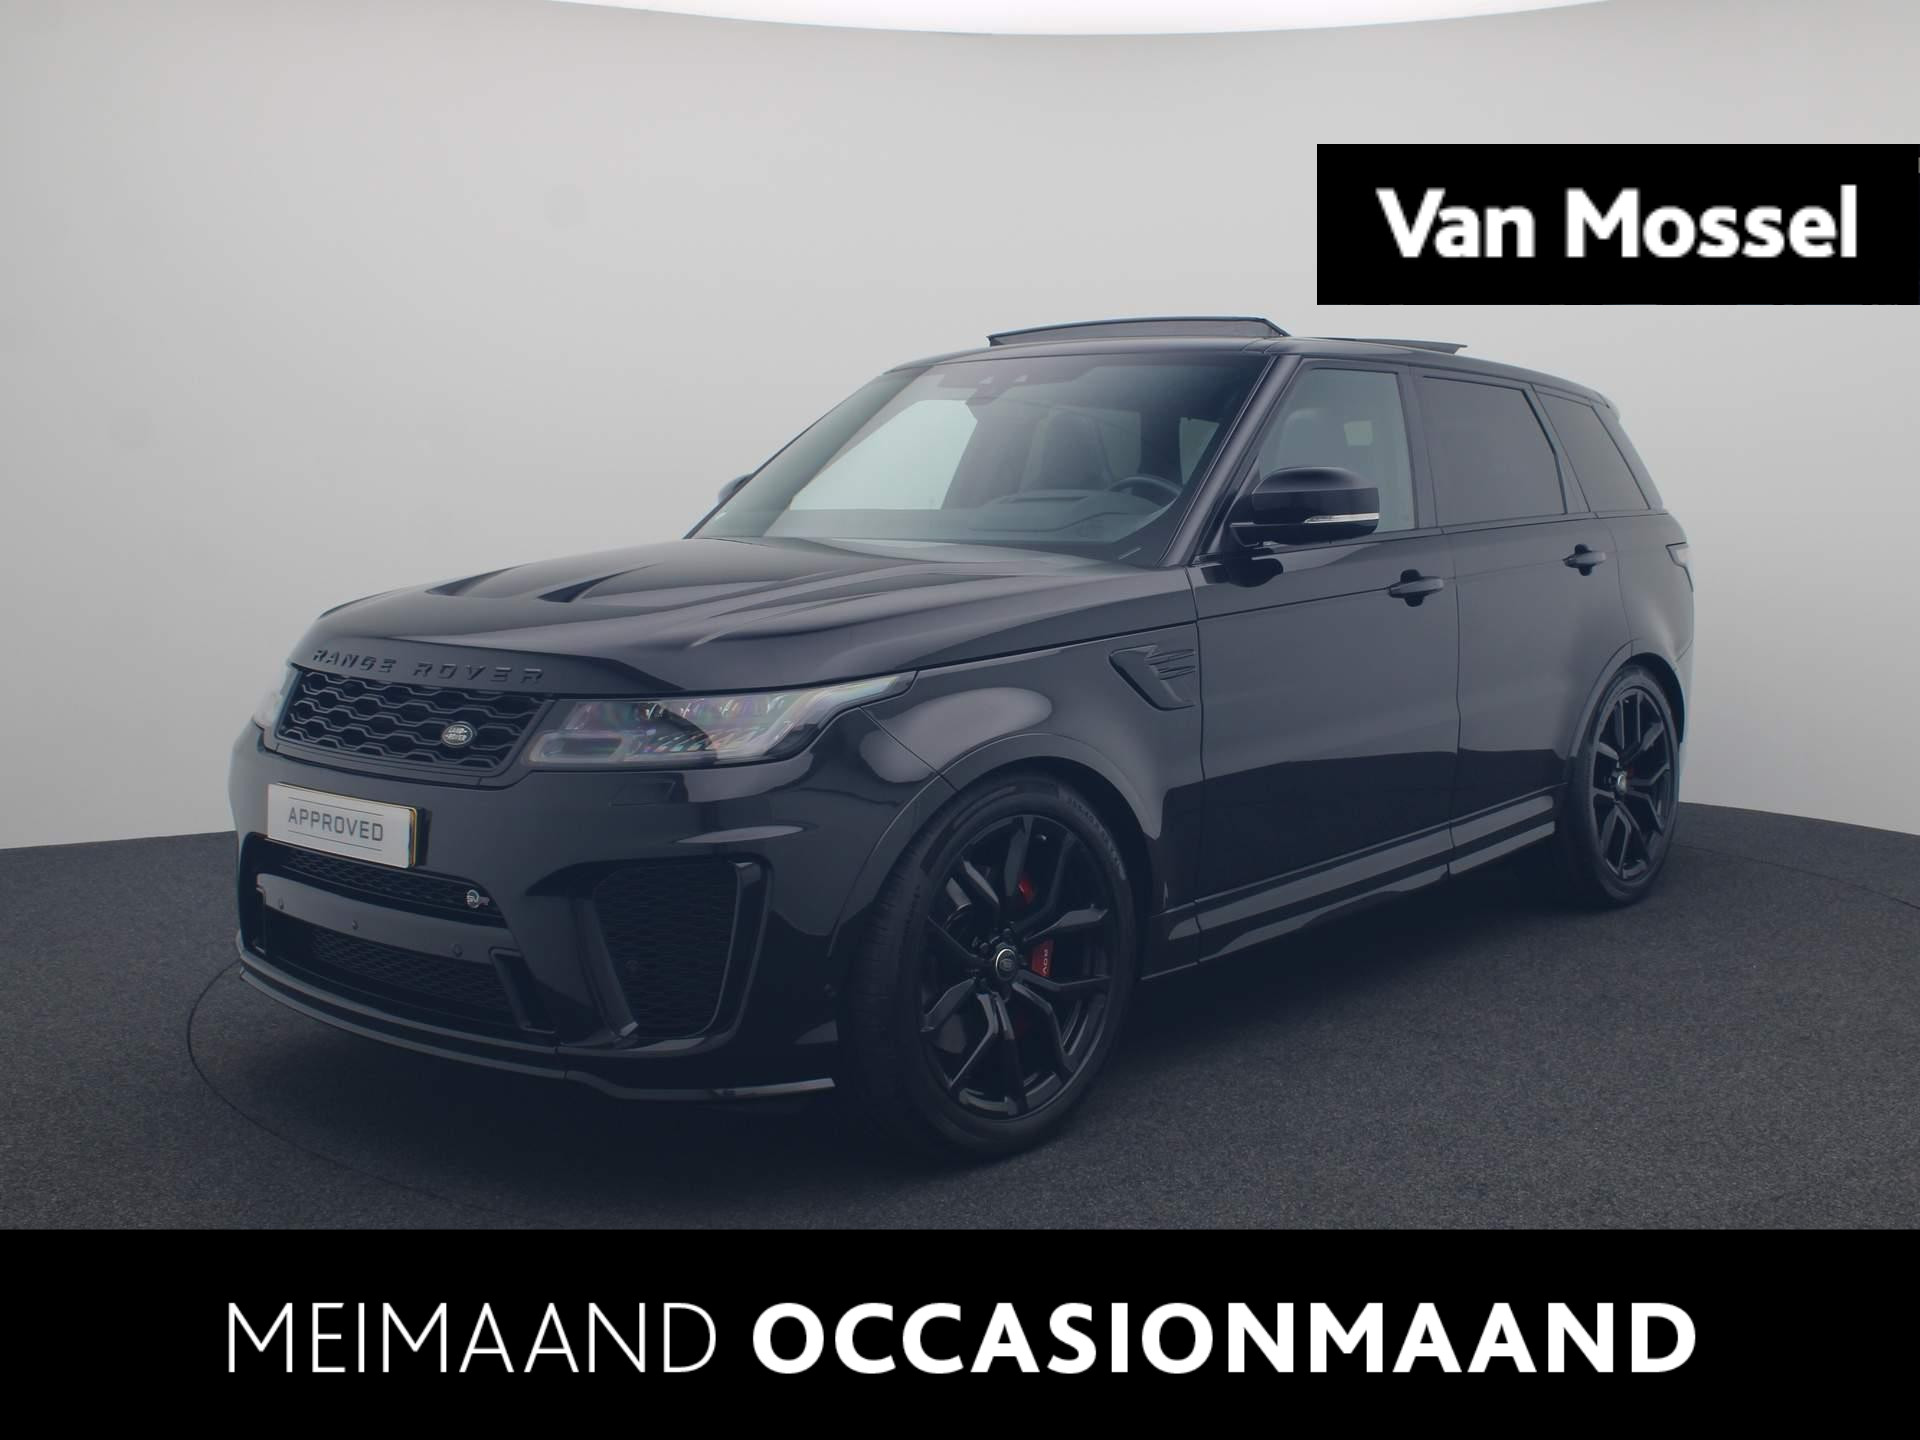 Land Rover Range Rover Sport 5.0 V8 SUPER CHARGED SVR | NP EUR €230.022,- | Head Up | Panorama Dak | 22 Inch | Carbon interieur |